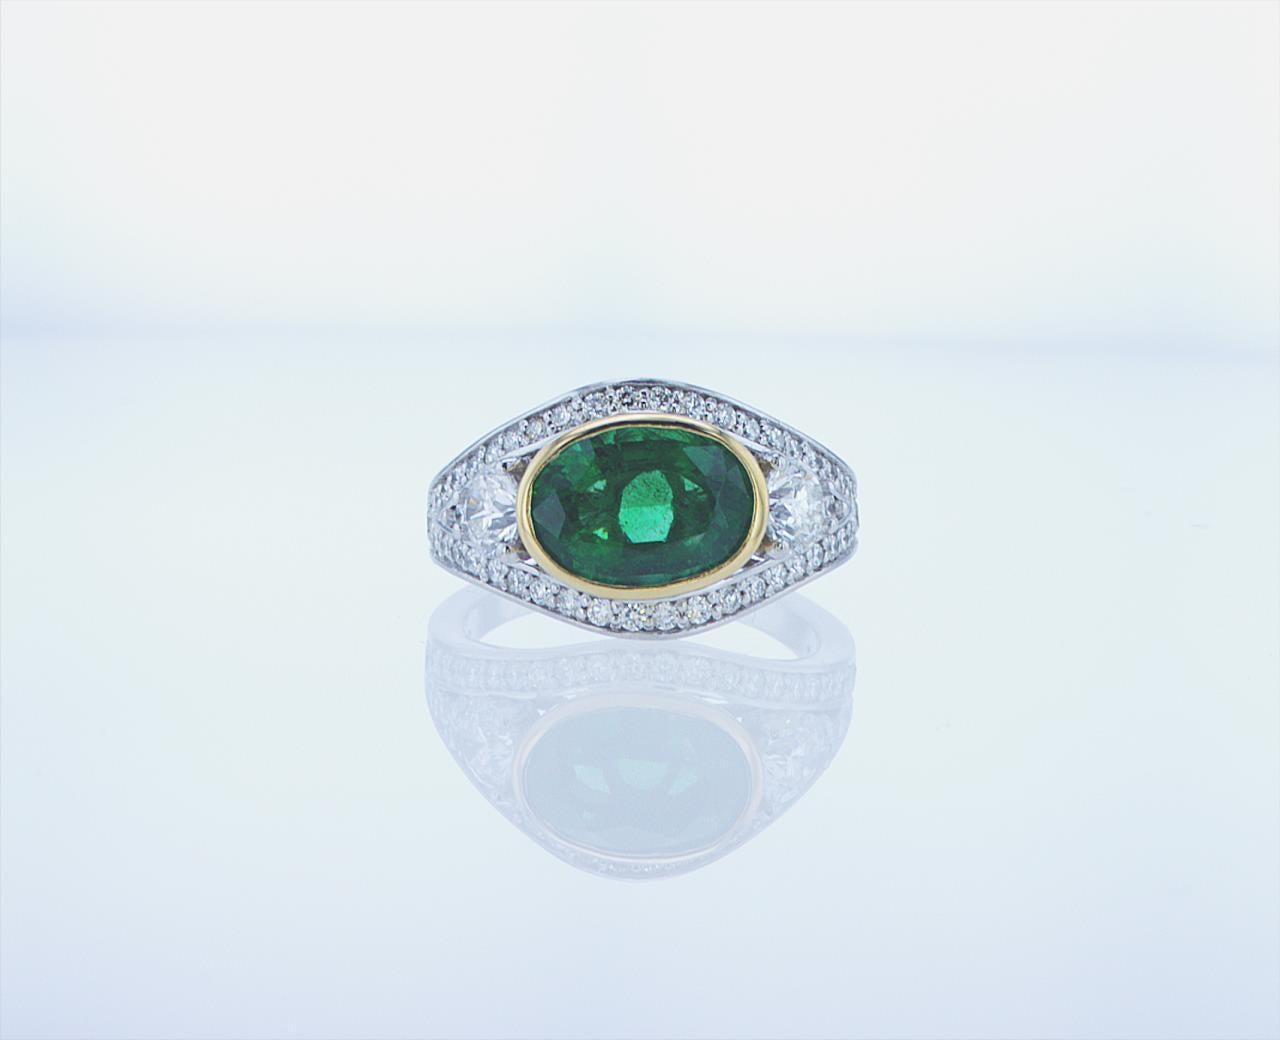 2.51ct Oval Emerald Cocktail ring featuring 0.72ct Total Weight of Large Roundnd Side Diamonds and 0.84ct Total Weight of Small Round Side Diamonds (All G/H Color, VS Clarity) in a Platinum Mounting with Yellow Gold Bezel.
